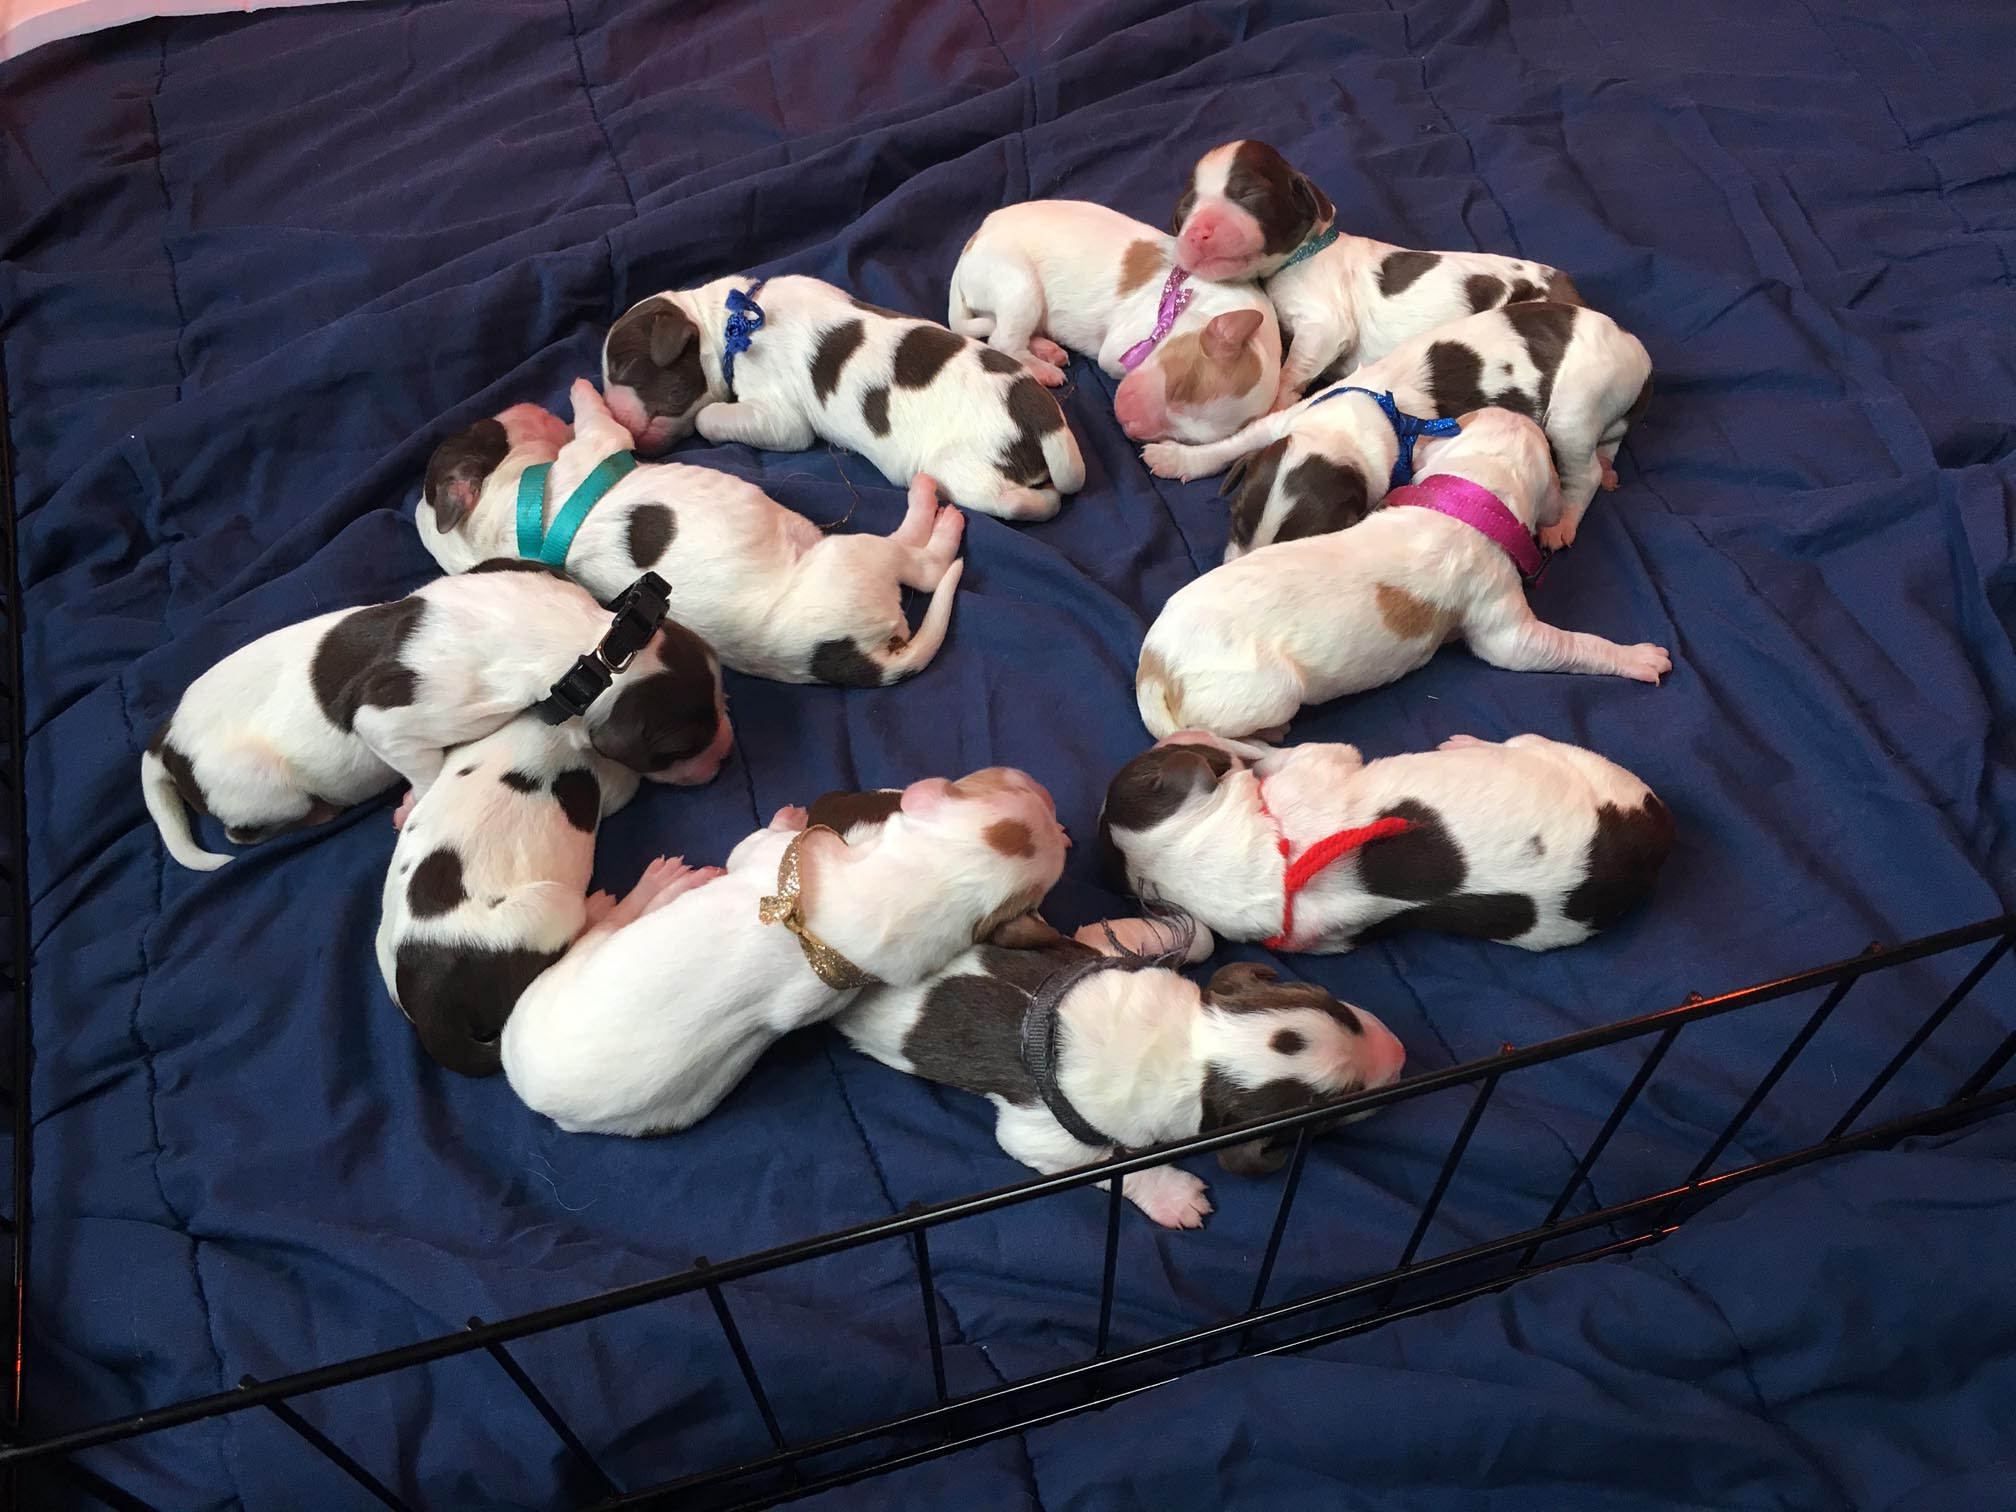 Guy's Brittany pups June 2019